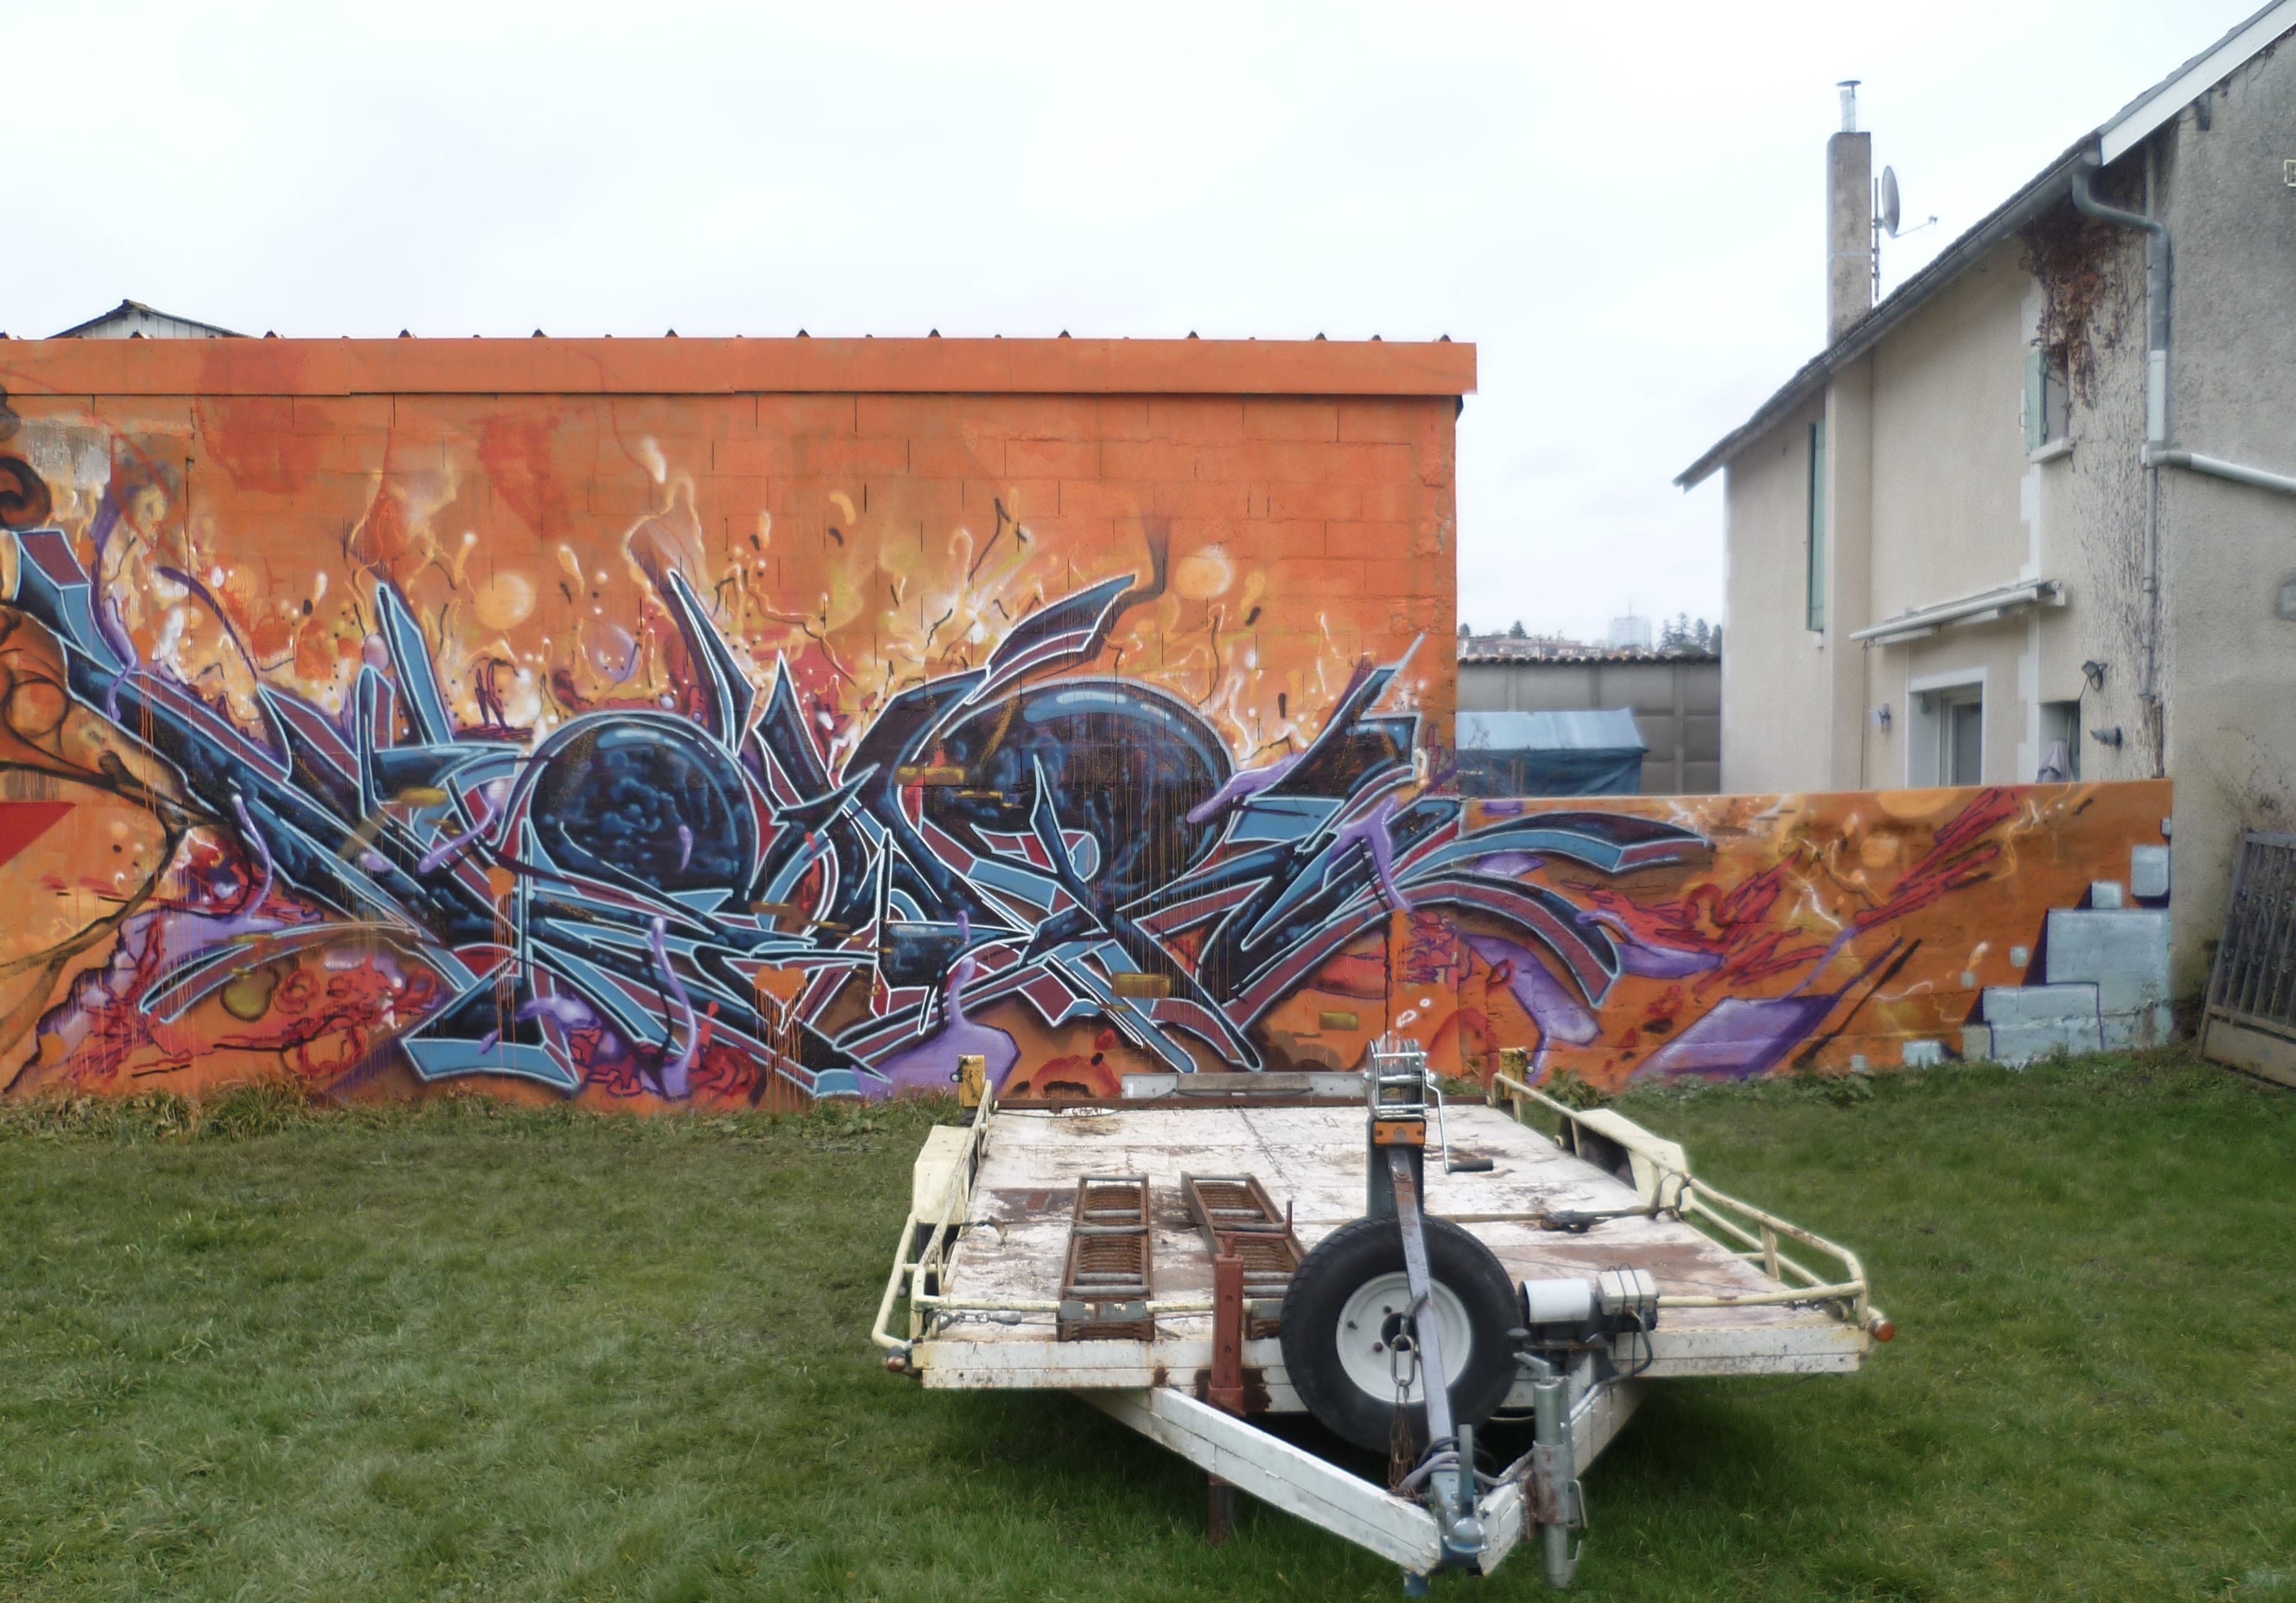 Graffiti 5648 #neurabf captured by Neur Abf in Périgueux France